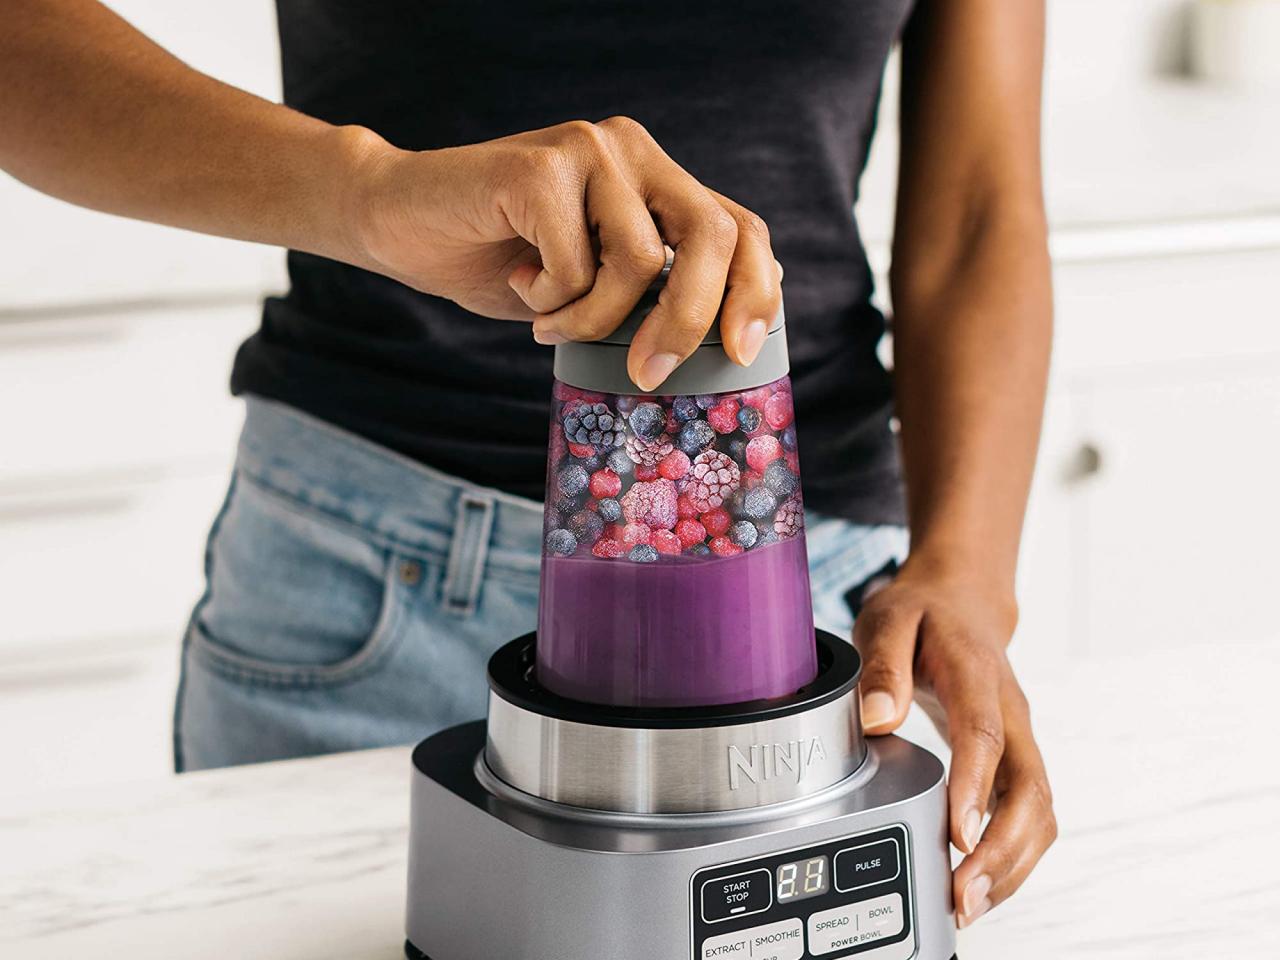 Deal Of The Day: Vitamix Blenders Are $150 Off Today